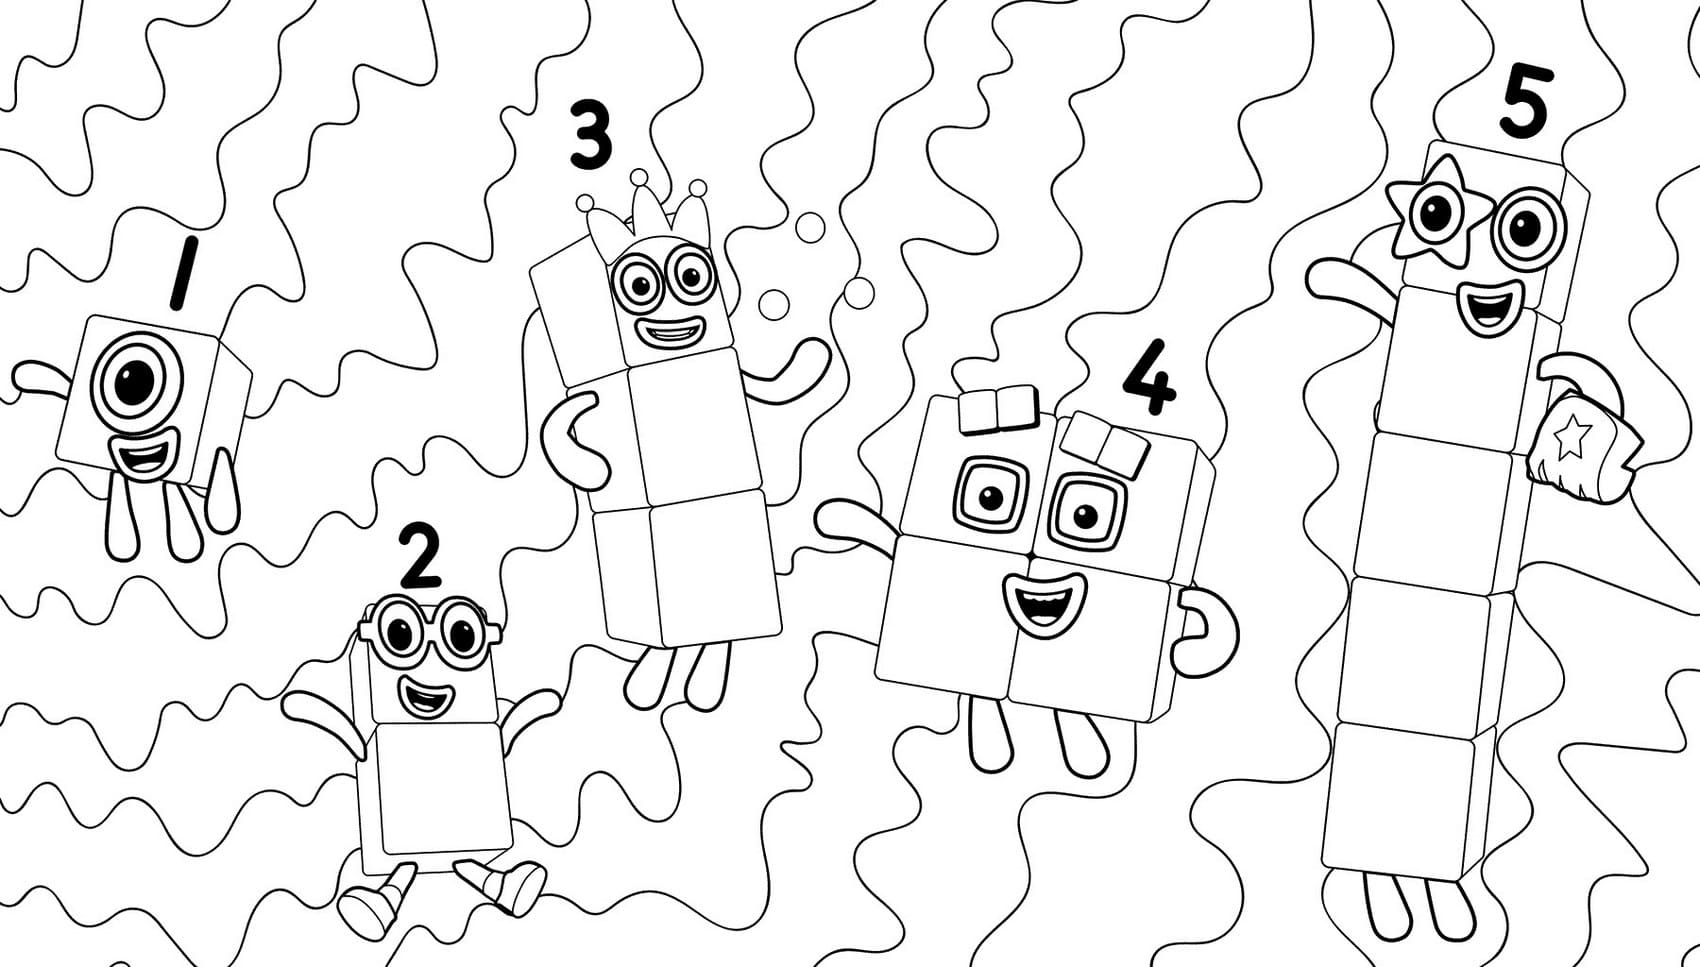 413 Unicorn Numberblocks 5 Coloring Pages for Kindergarten